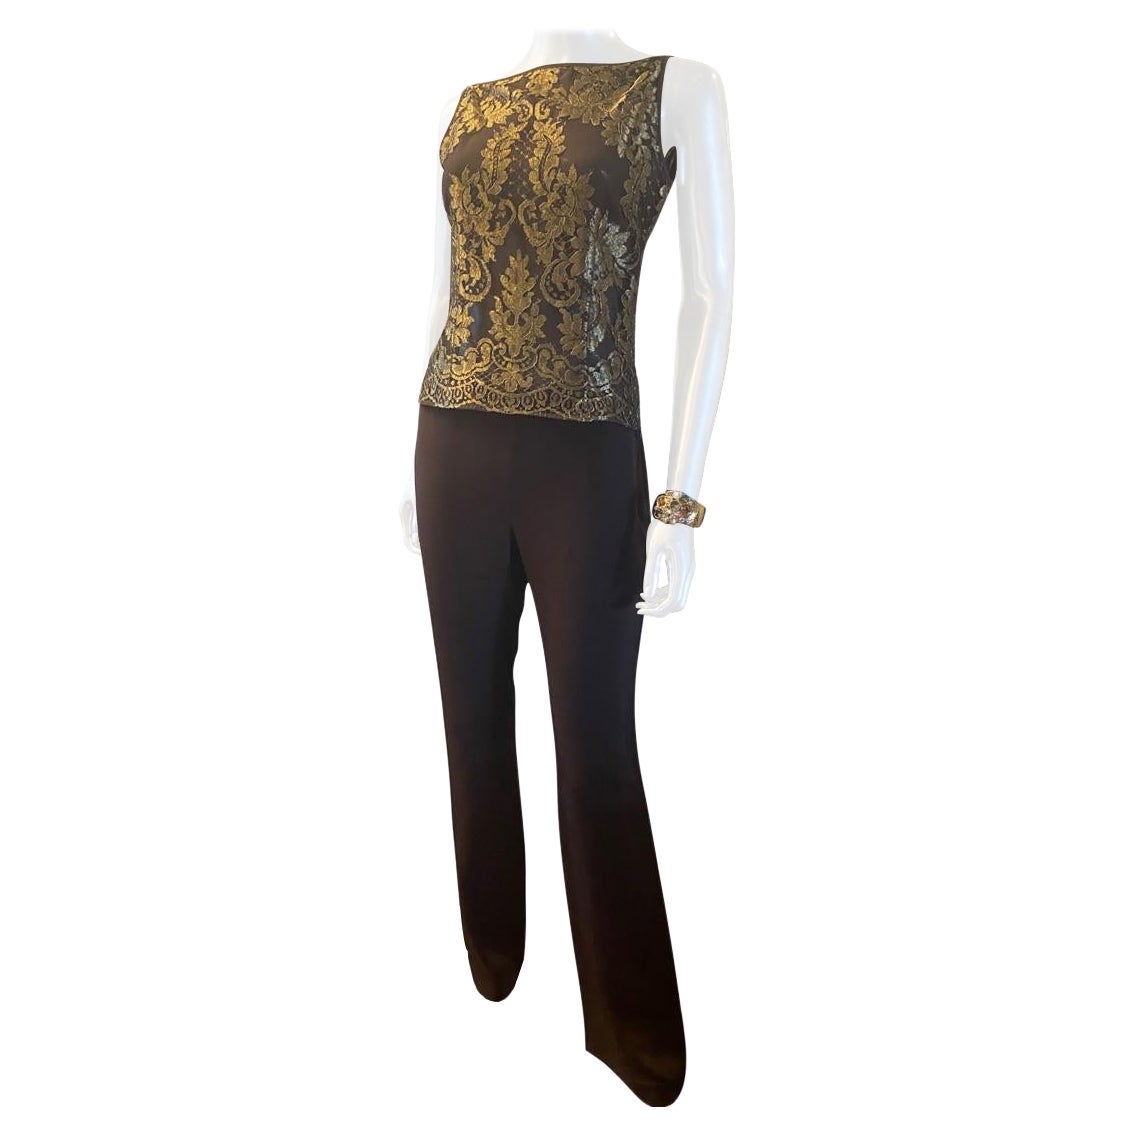 Valentino Italy Chocolate & Metallic Gold Blouse and Trouser Set Size 6-8 For Sale